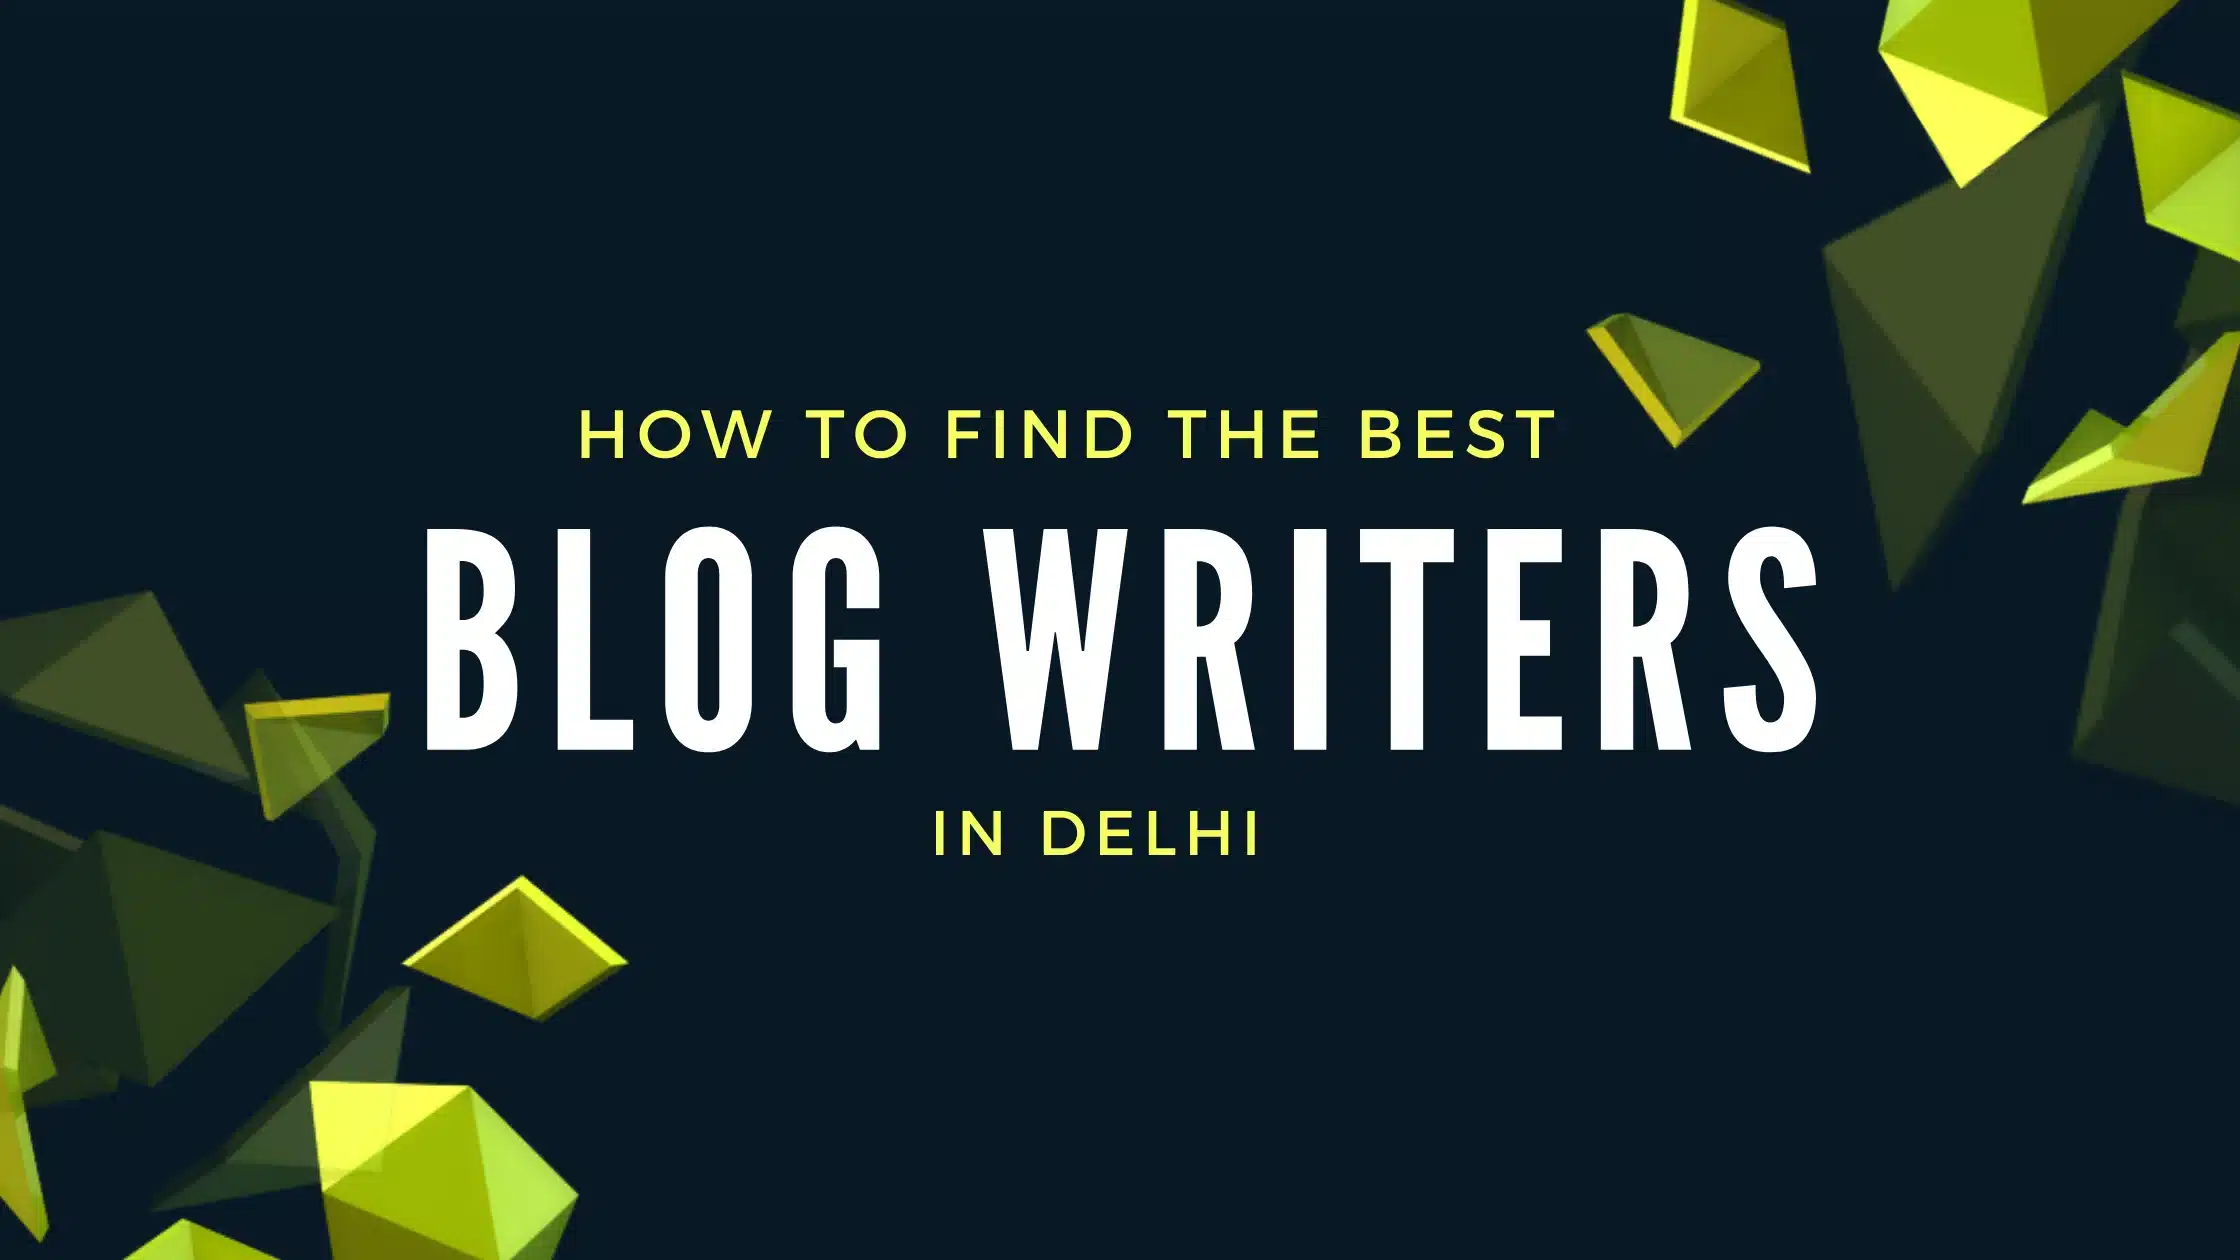 How To Find The Best Blog Writers In Delhi